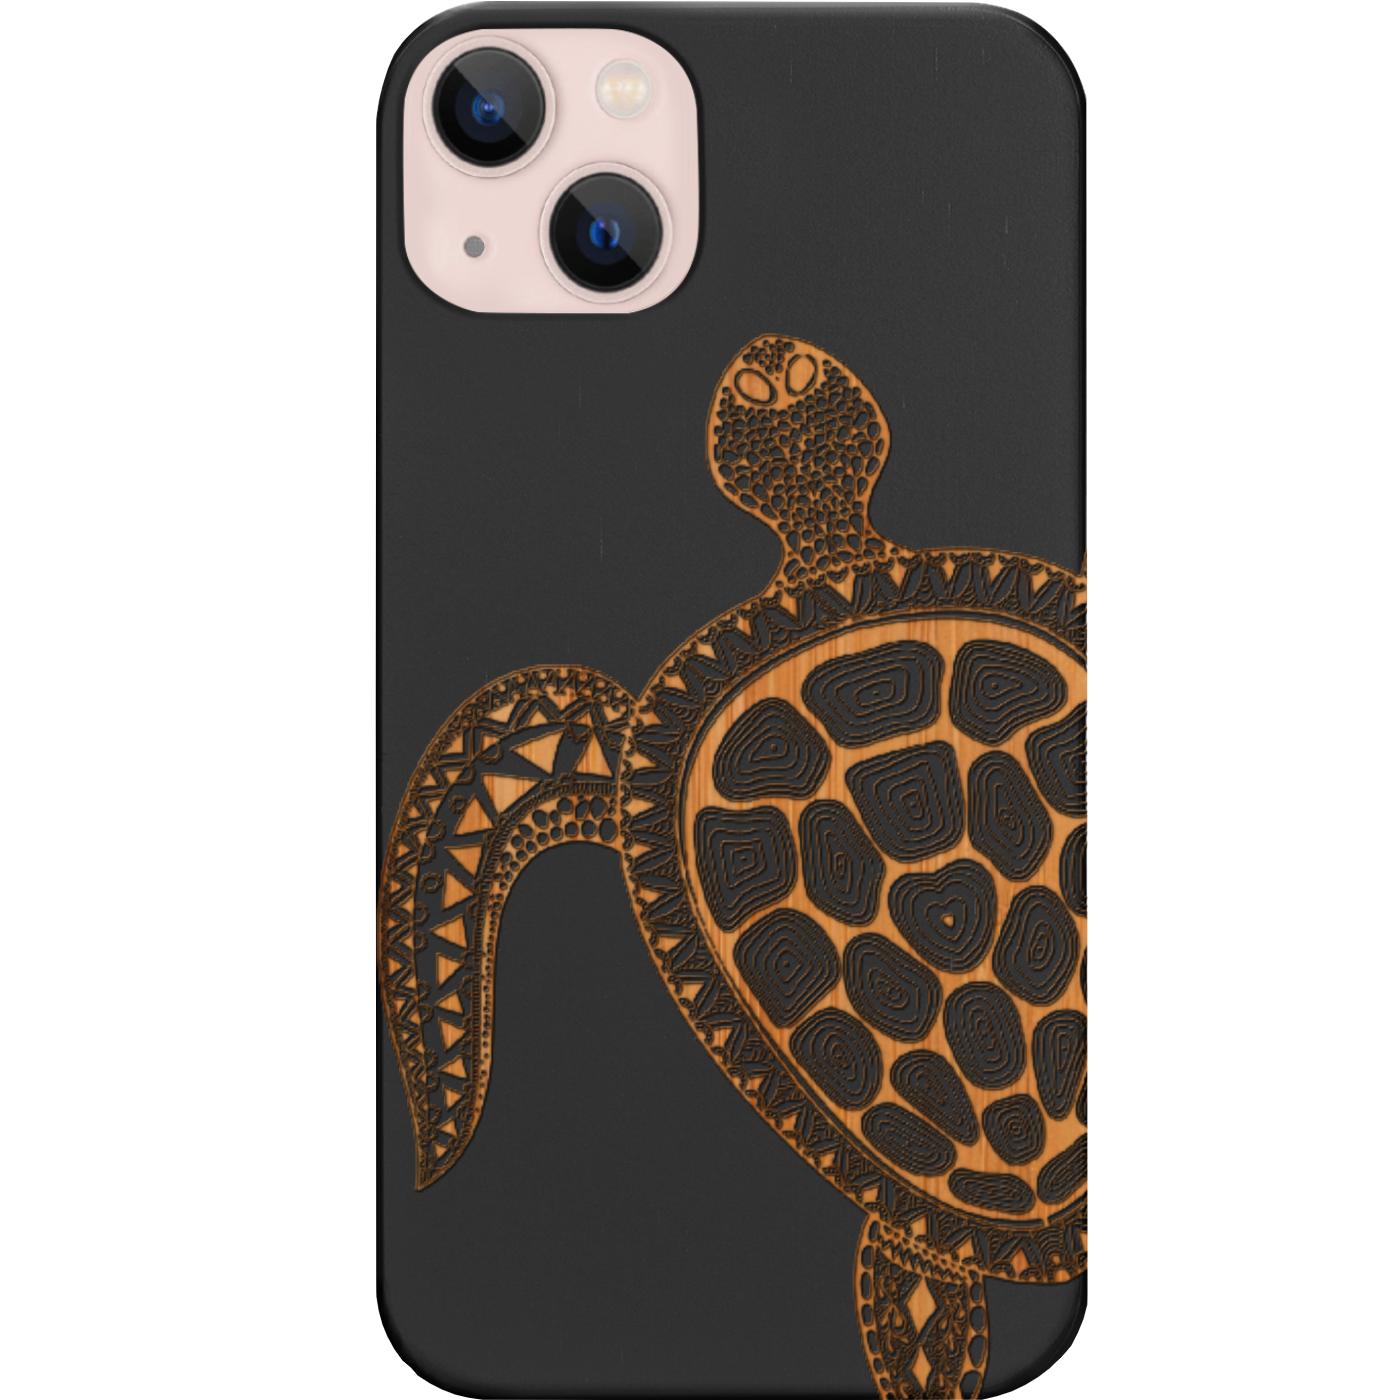 Turtle 3 - Engraved Phone Case